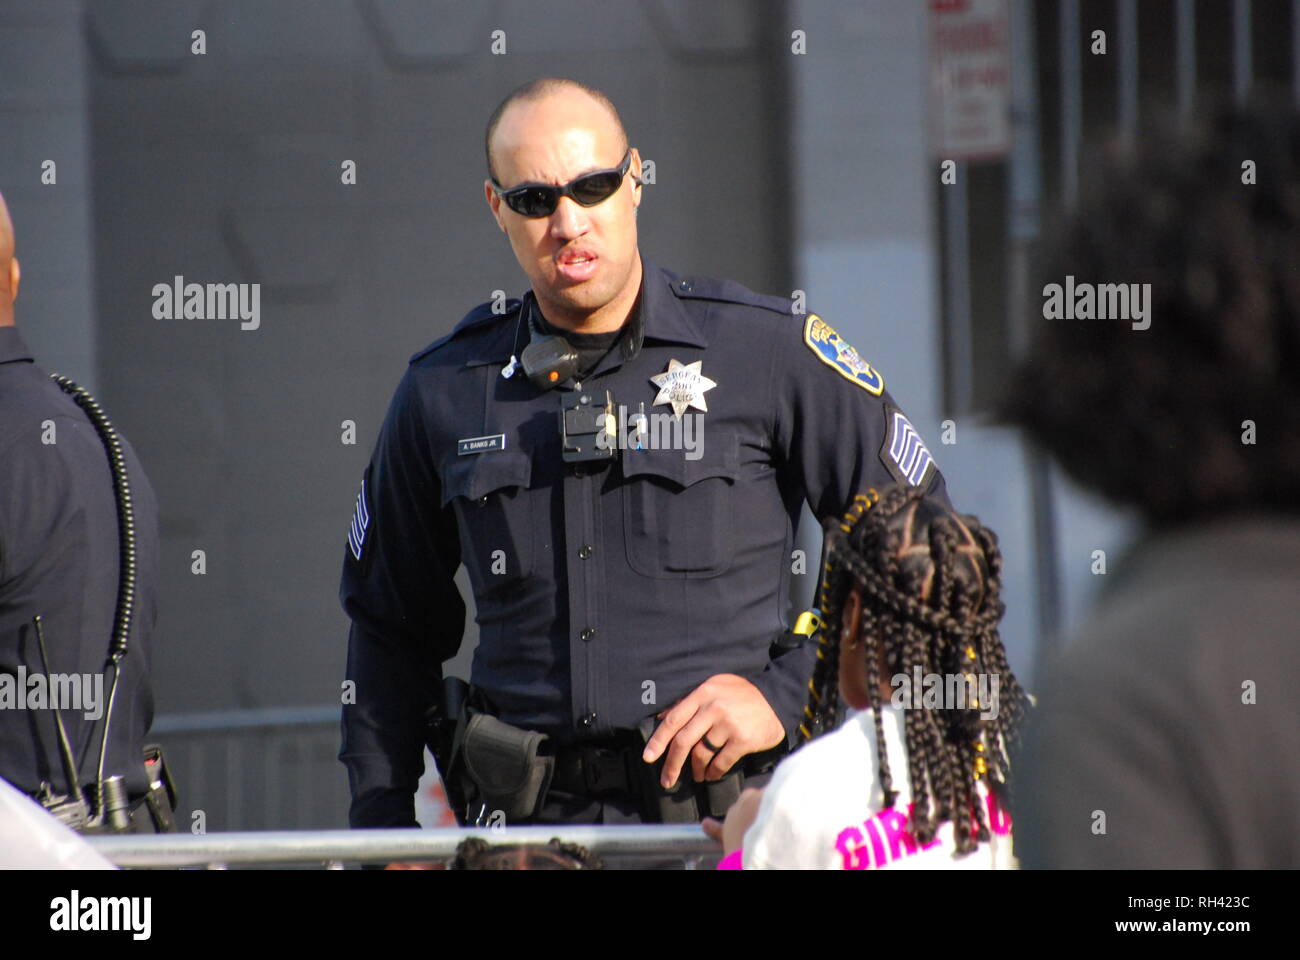 Oakland police Officer Anthony Banks Jr. providing security outside a Kamala Harris for President rally in downtown Oakland on Jan. 27, 2019. Stock Photo